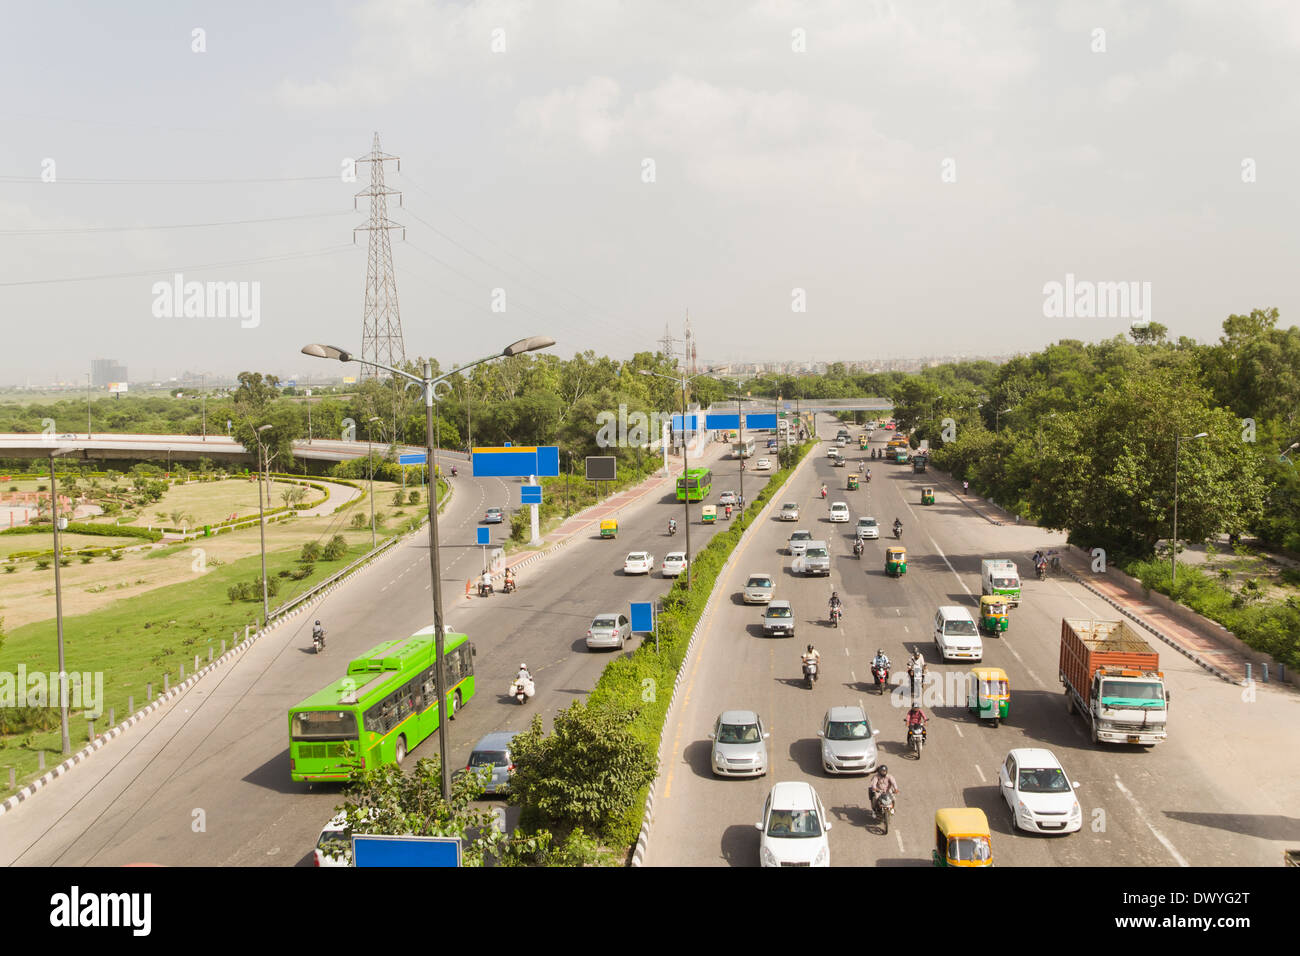 Indian Traffic on Road, Traffic on Highway, Elevated view of traffic, Traffic. Road side, Car, Auto, Bike, Transportations, Stock Photo